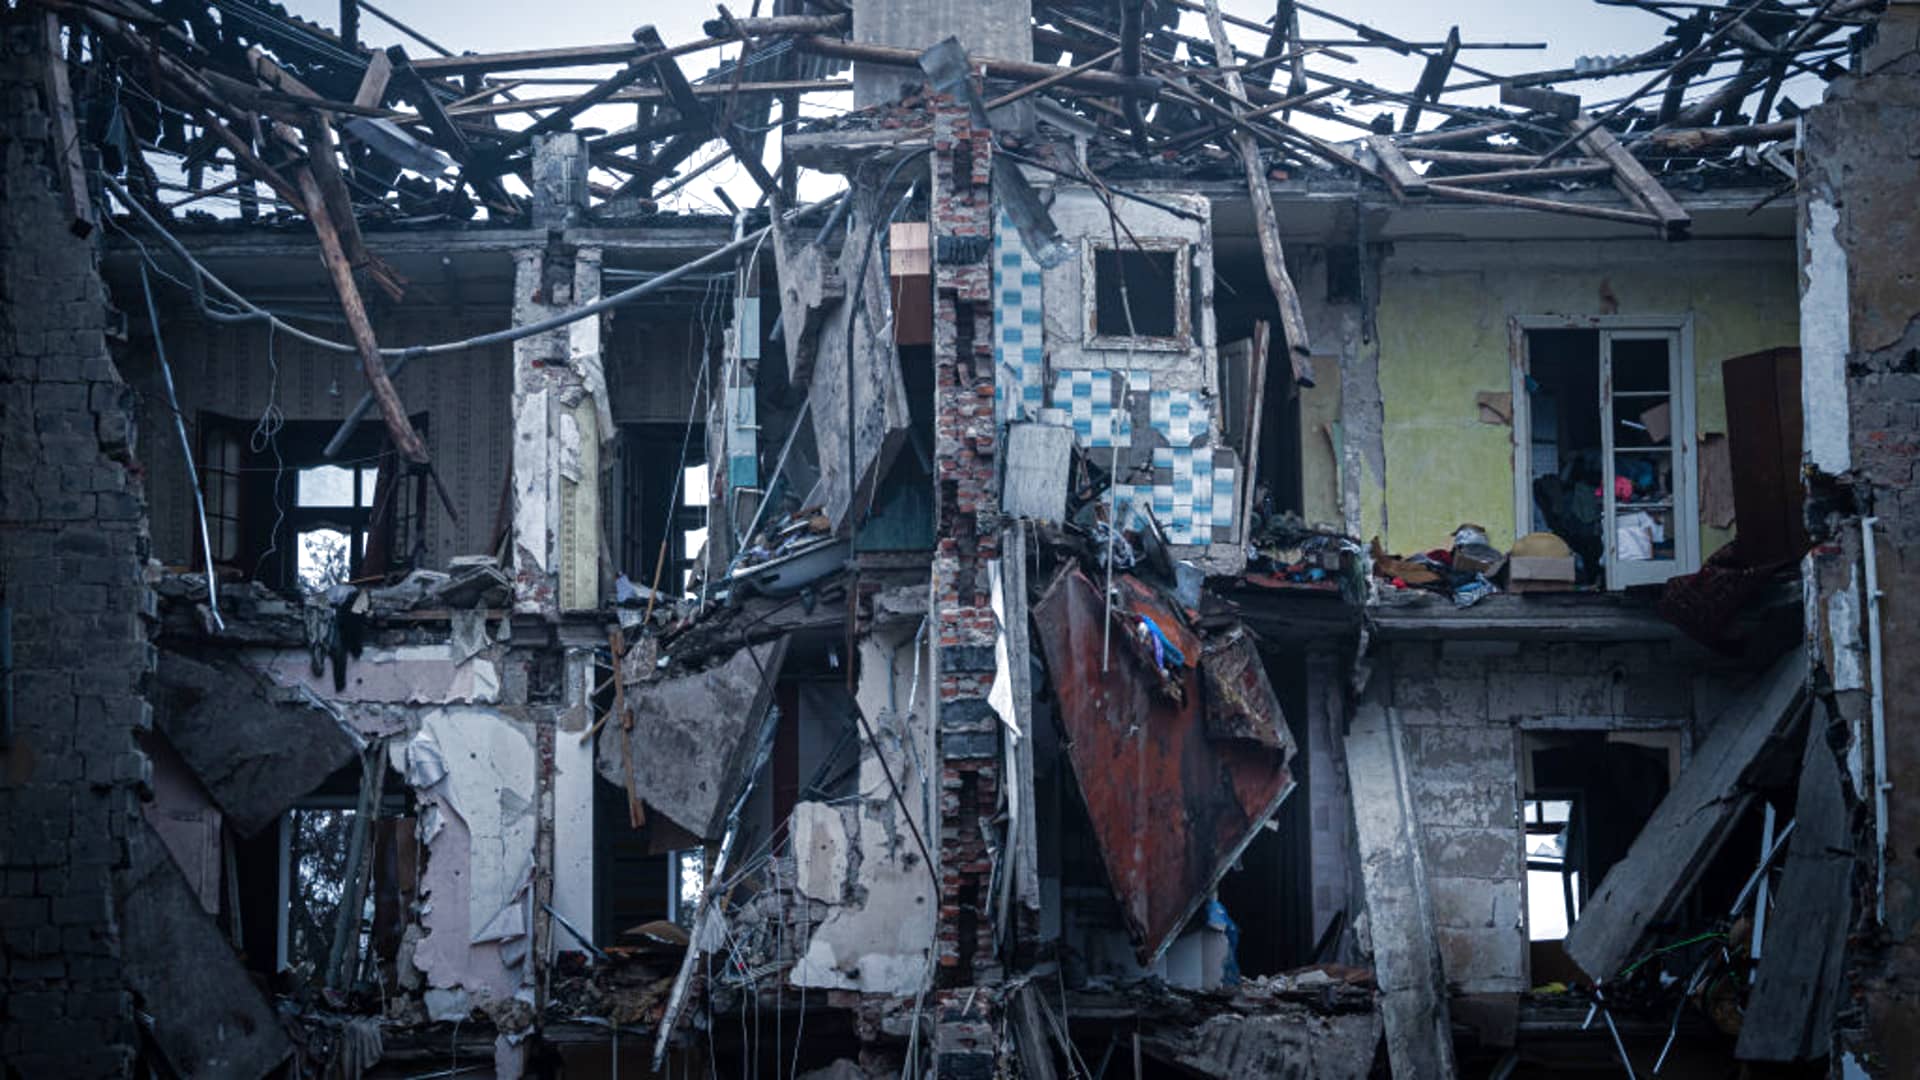 A view of the damaged building after Russian rocket attack as military mobility continues within the Russian-Ukrainian war in Kramatorsk, Ukraine on February 28, 2023.